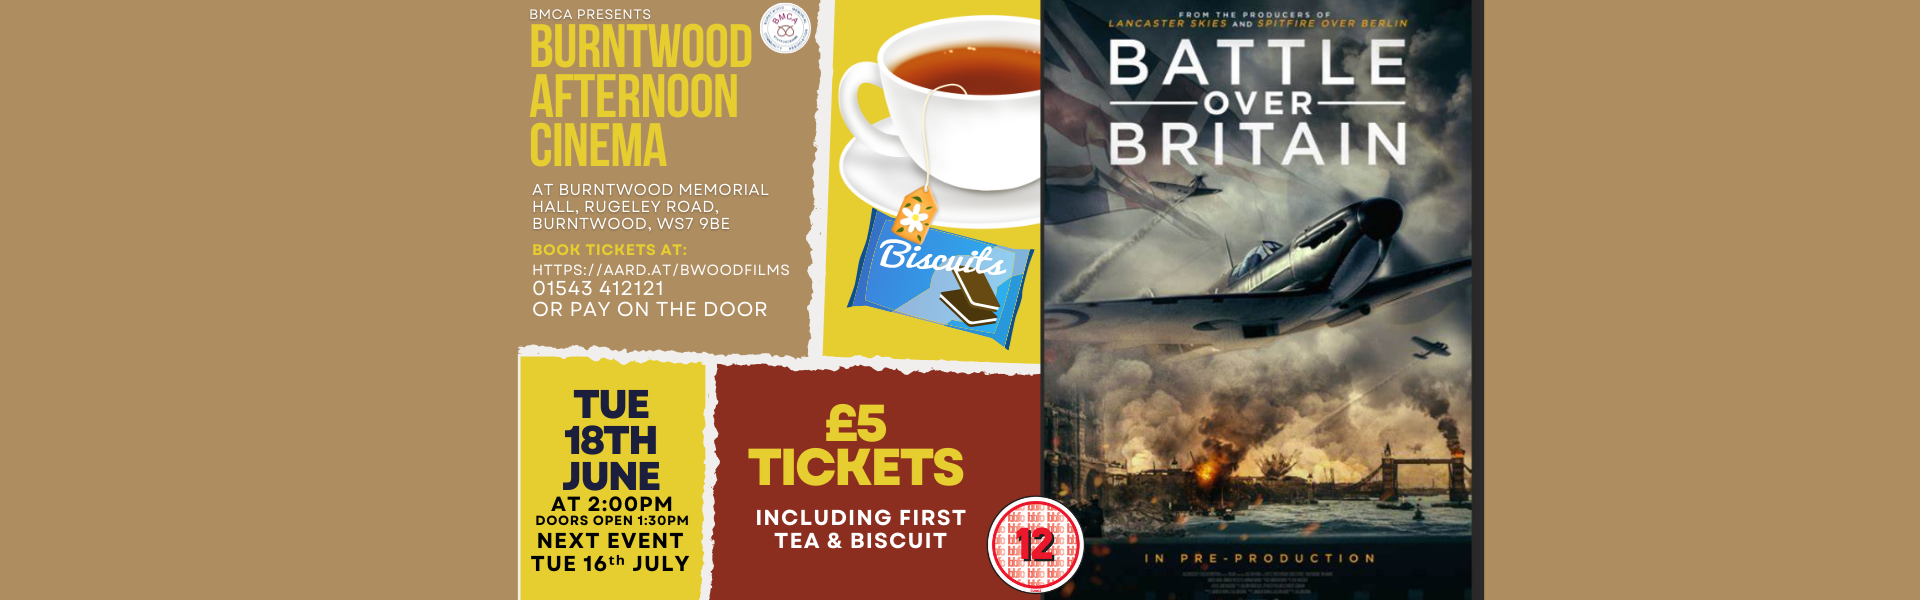 Burntwood Afternoon Cinema - Battle Over Britain